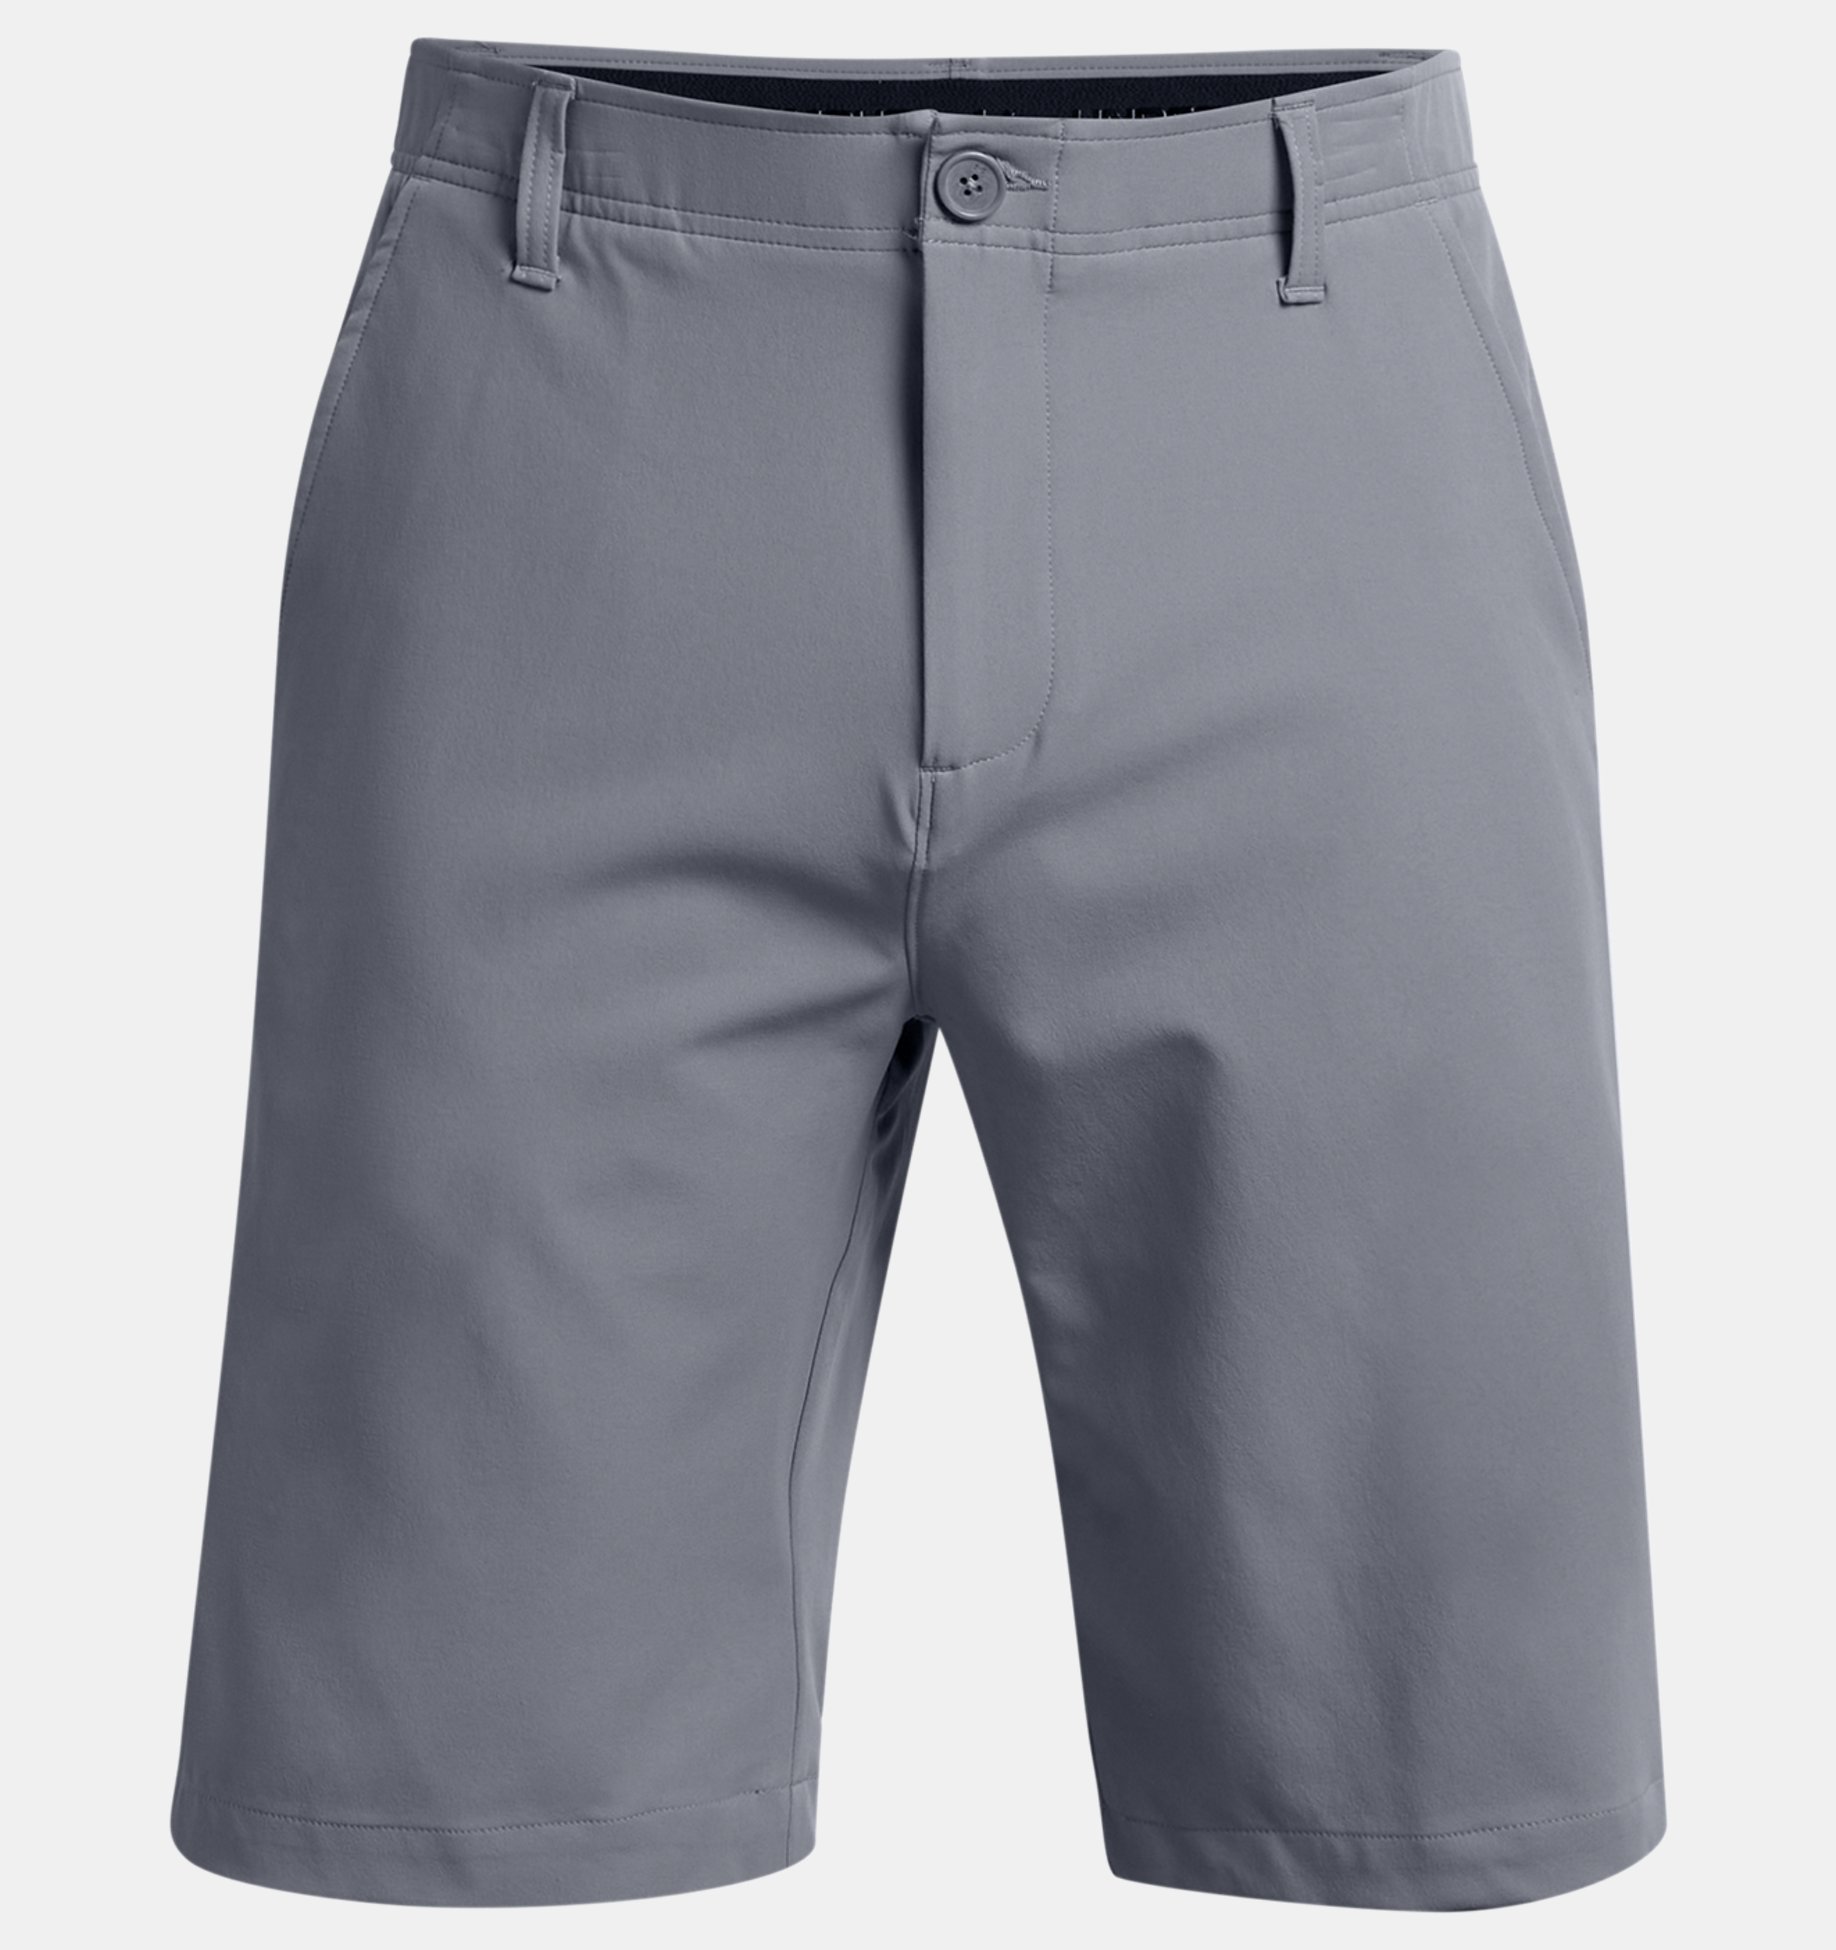 Under Armour  | 1370086-035 | Drive Taper Short | Steel / Halo Grey